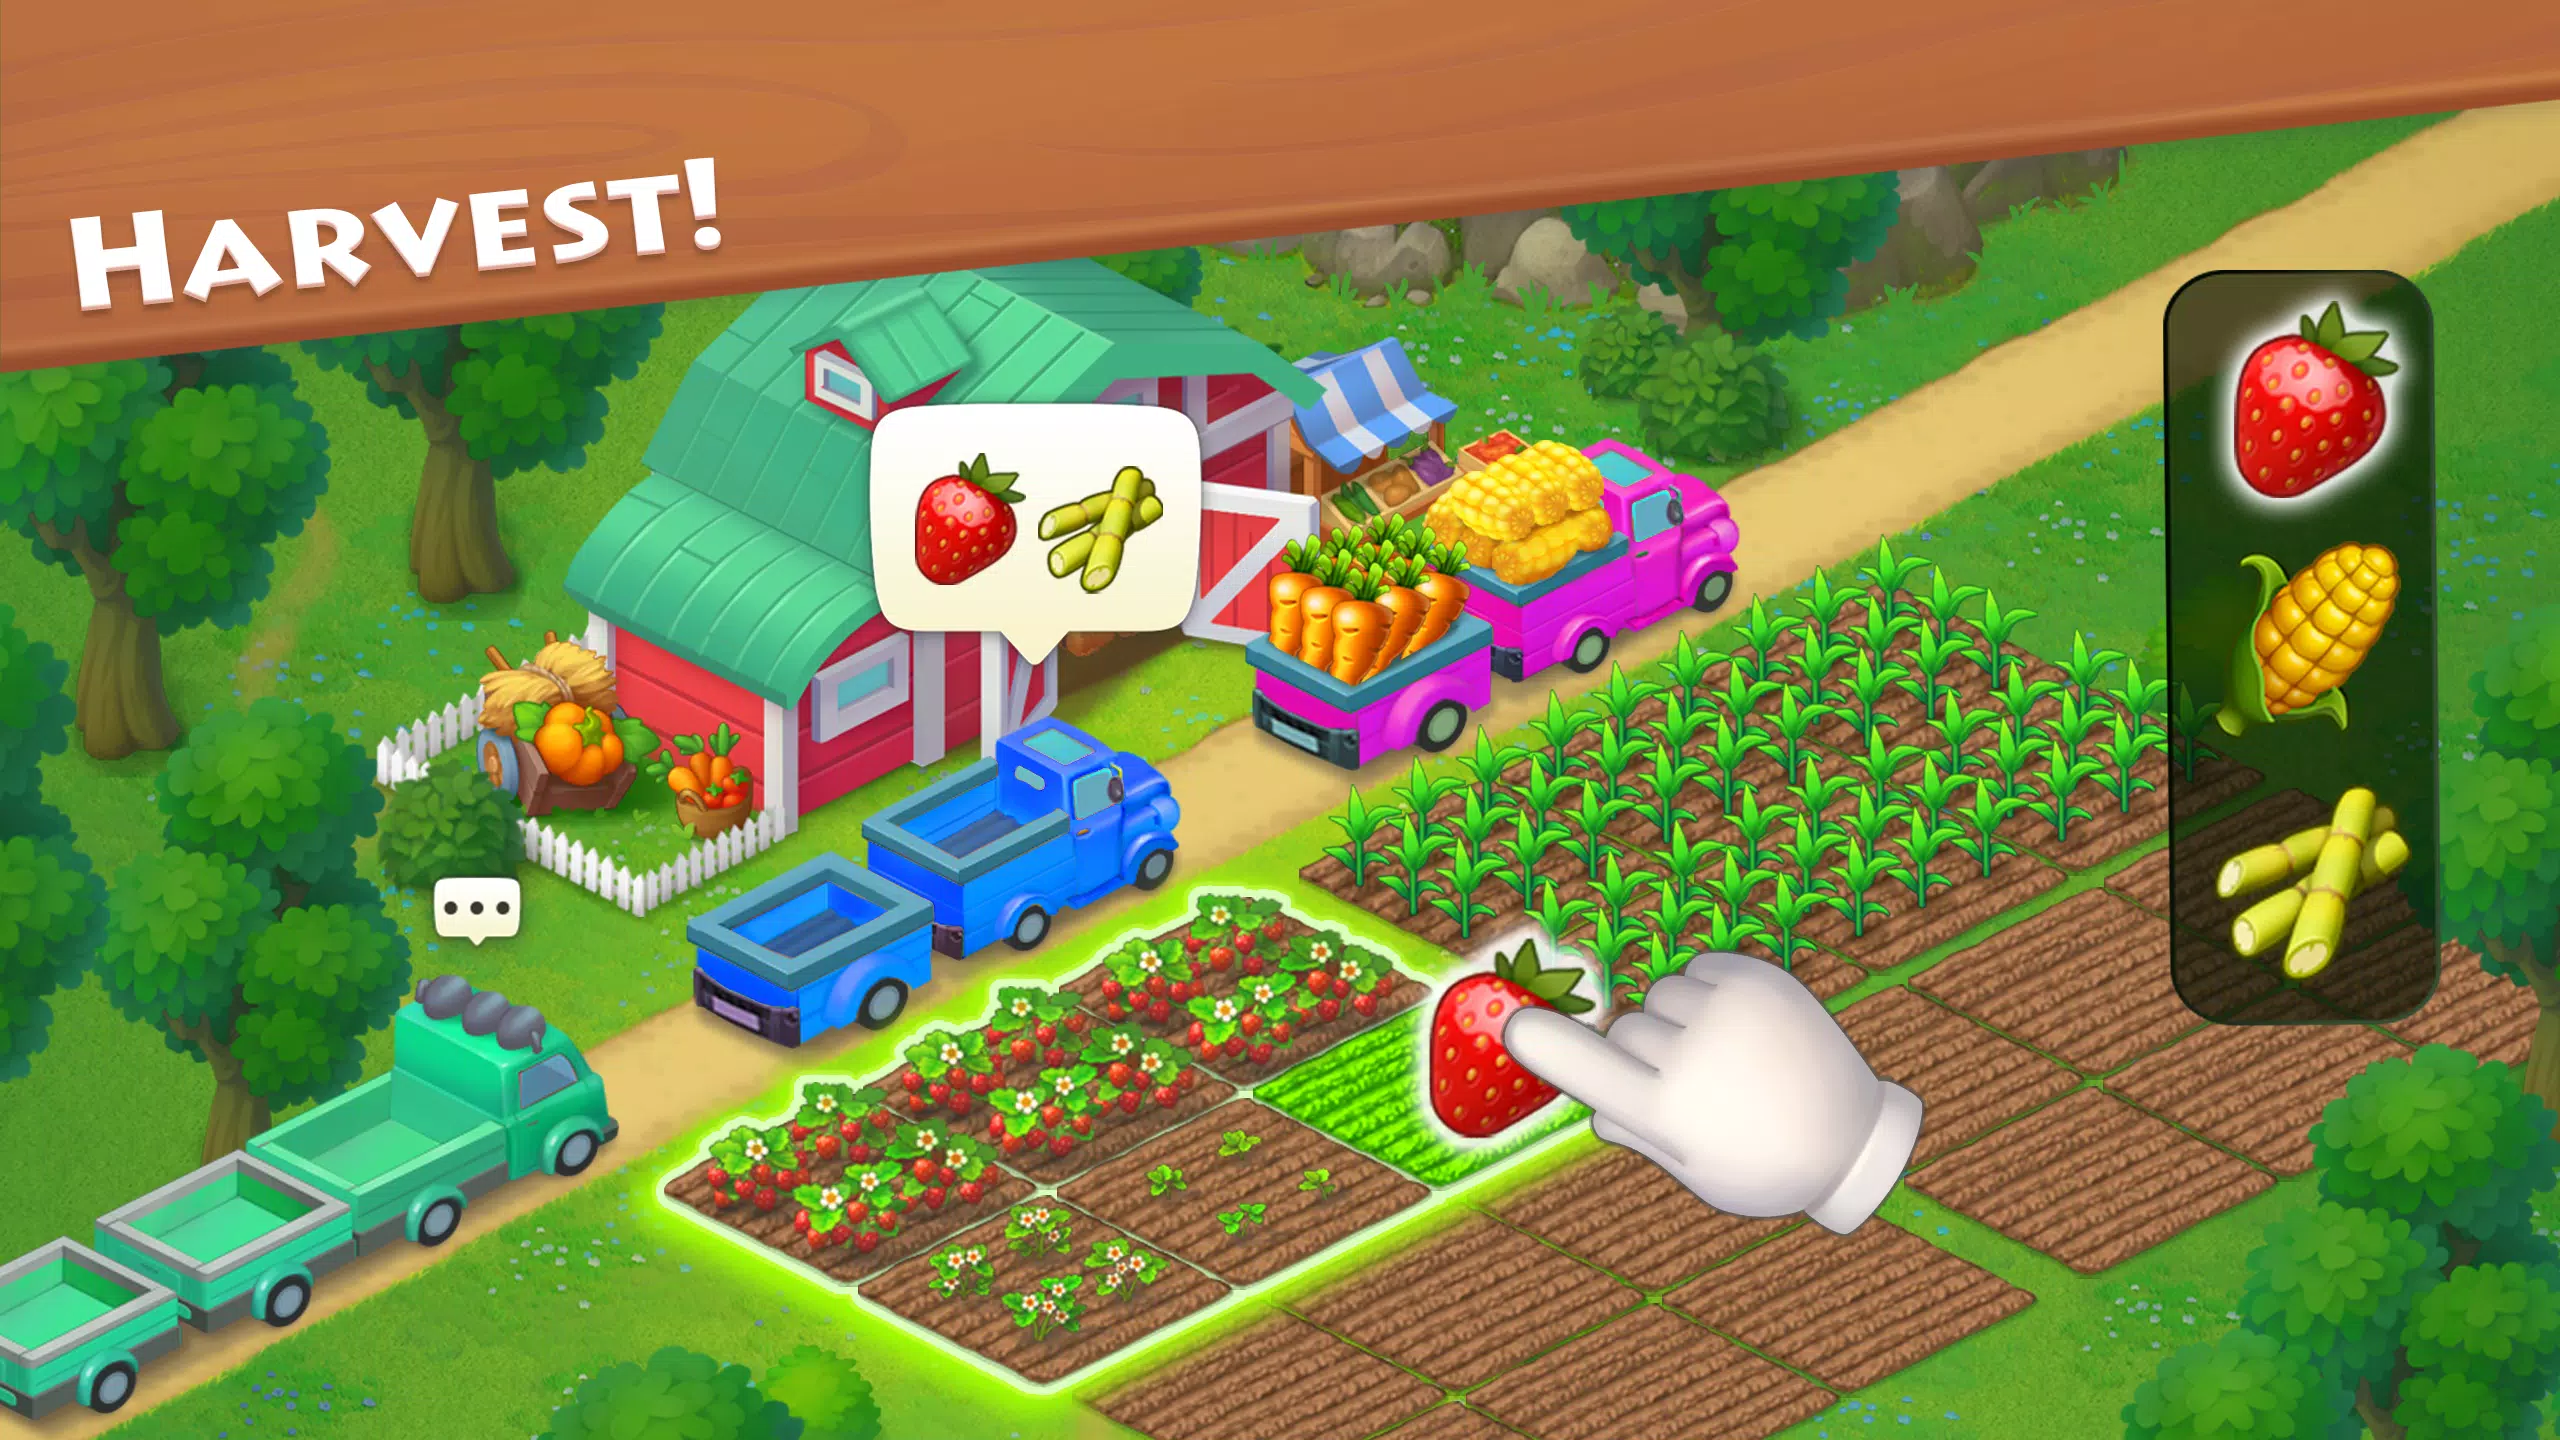 Monkey Mart: on-line 11.0.3 APK + Mod (Free purchase) for Android